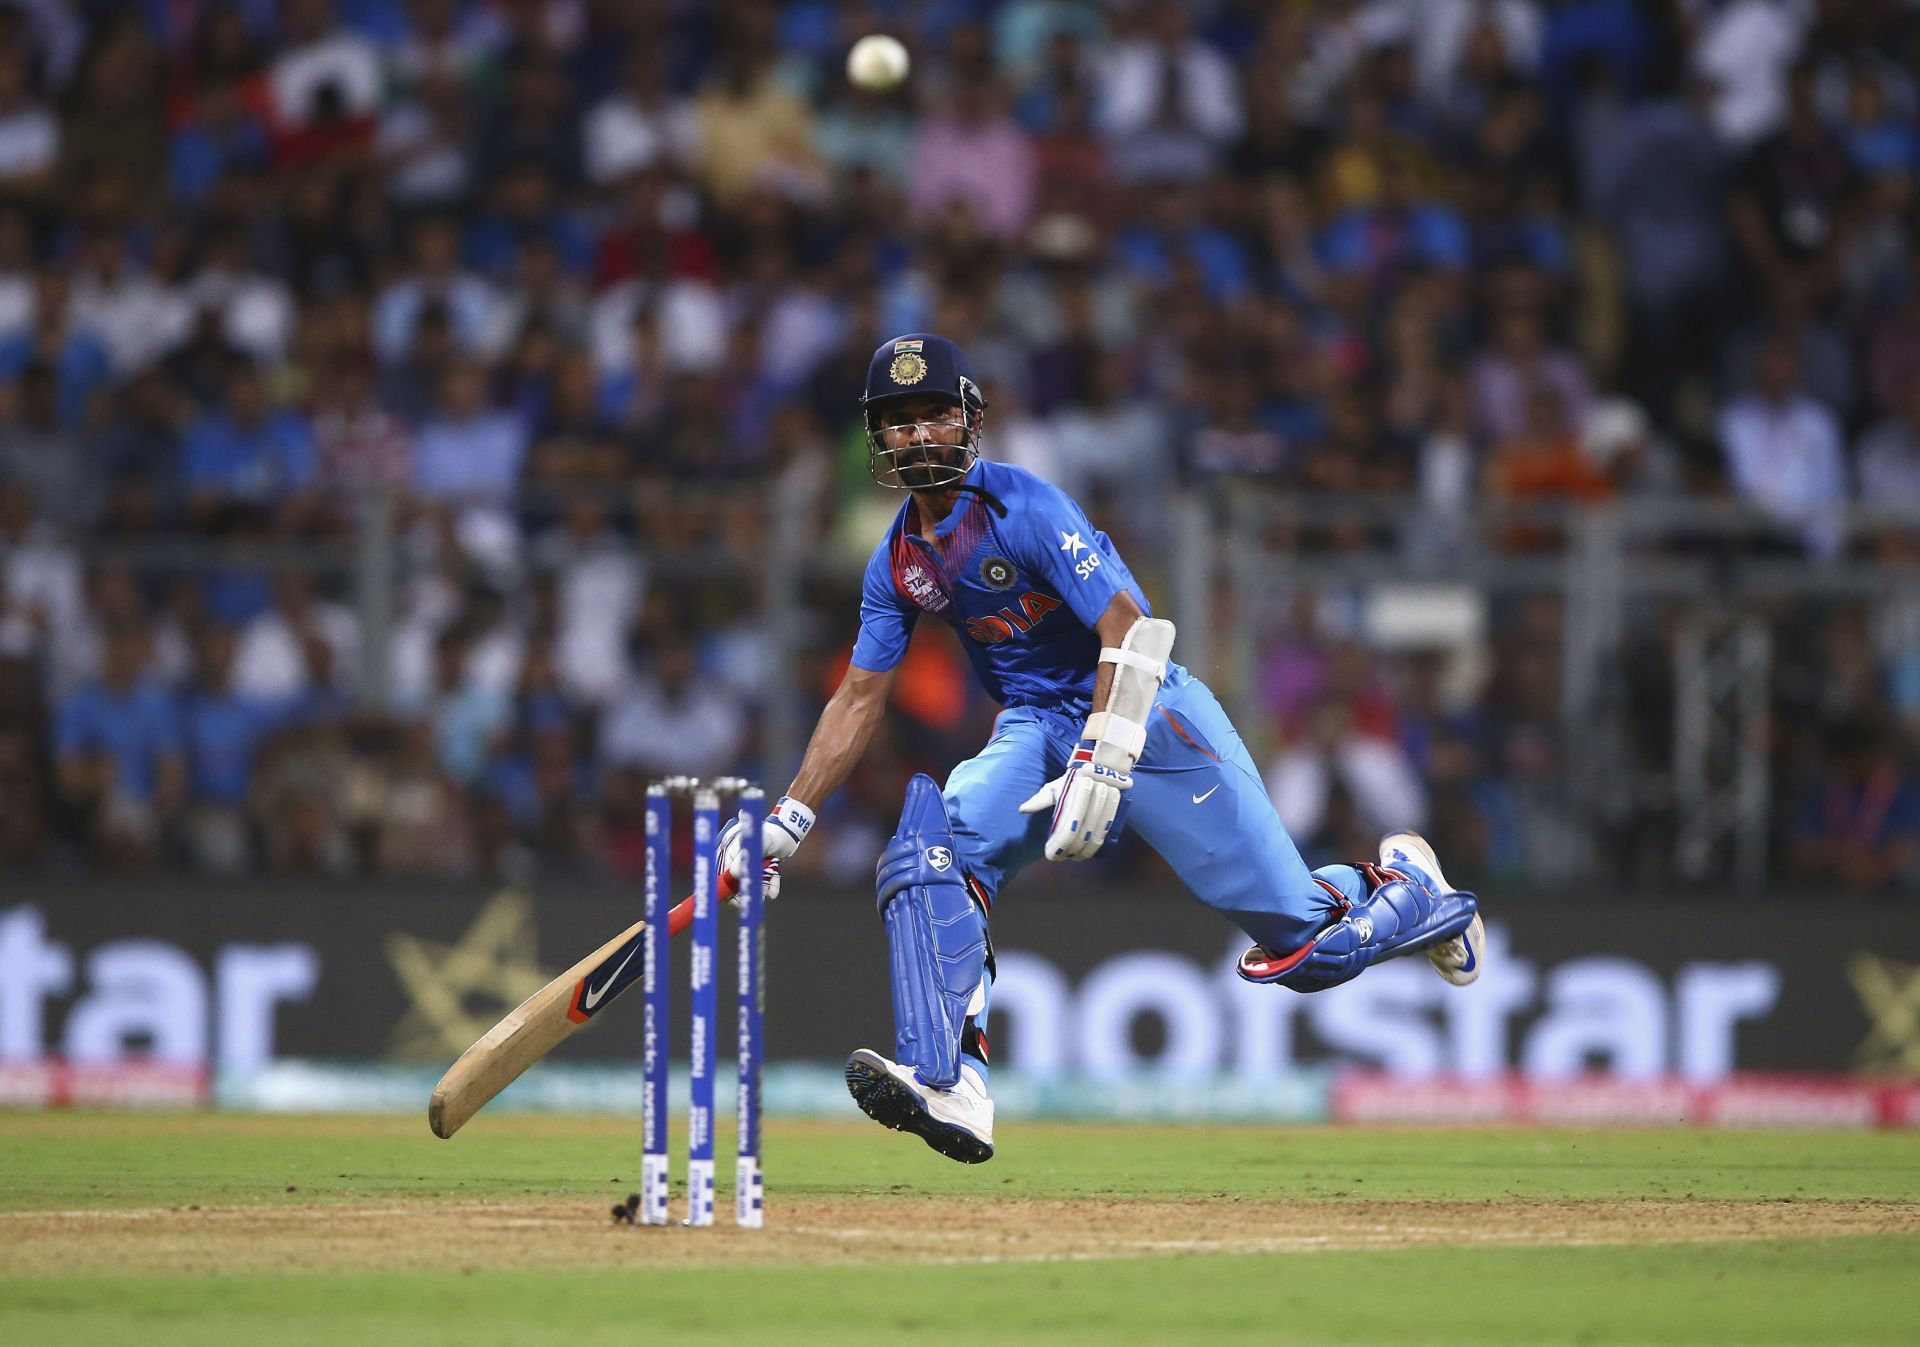 Rahane scored a century against the Windies in an ODI in 2017